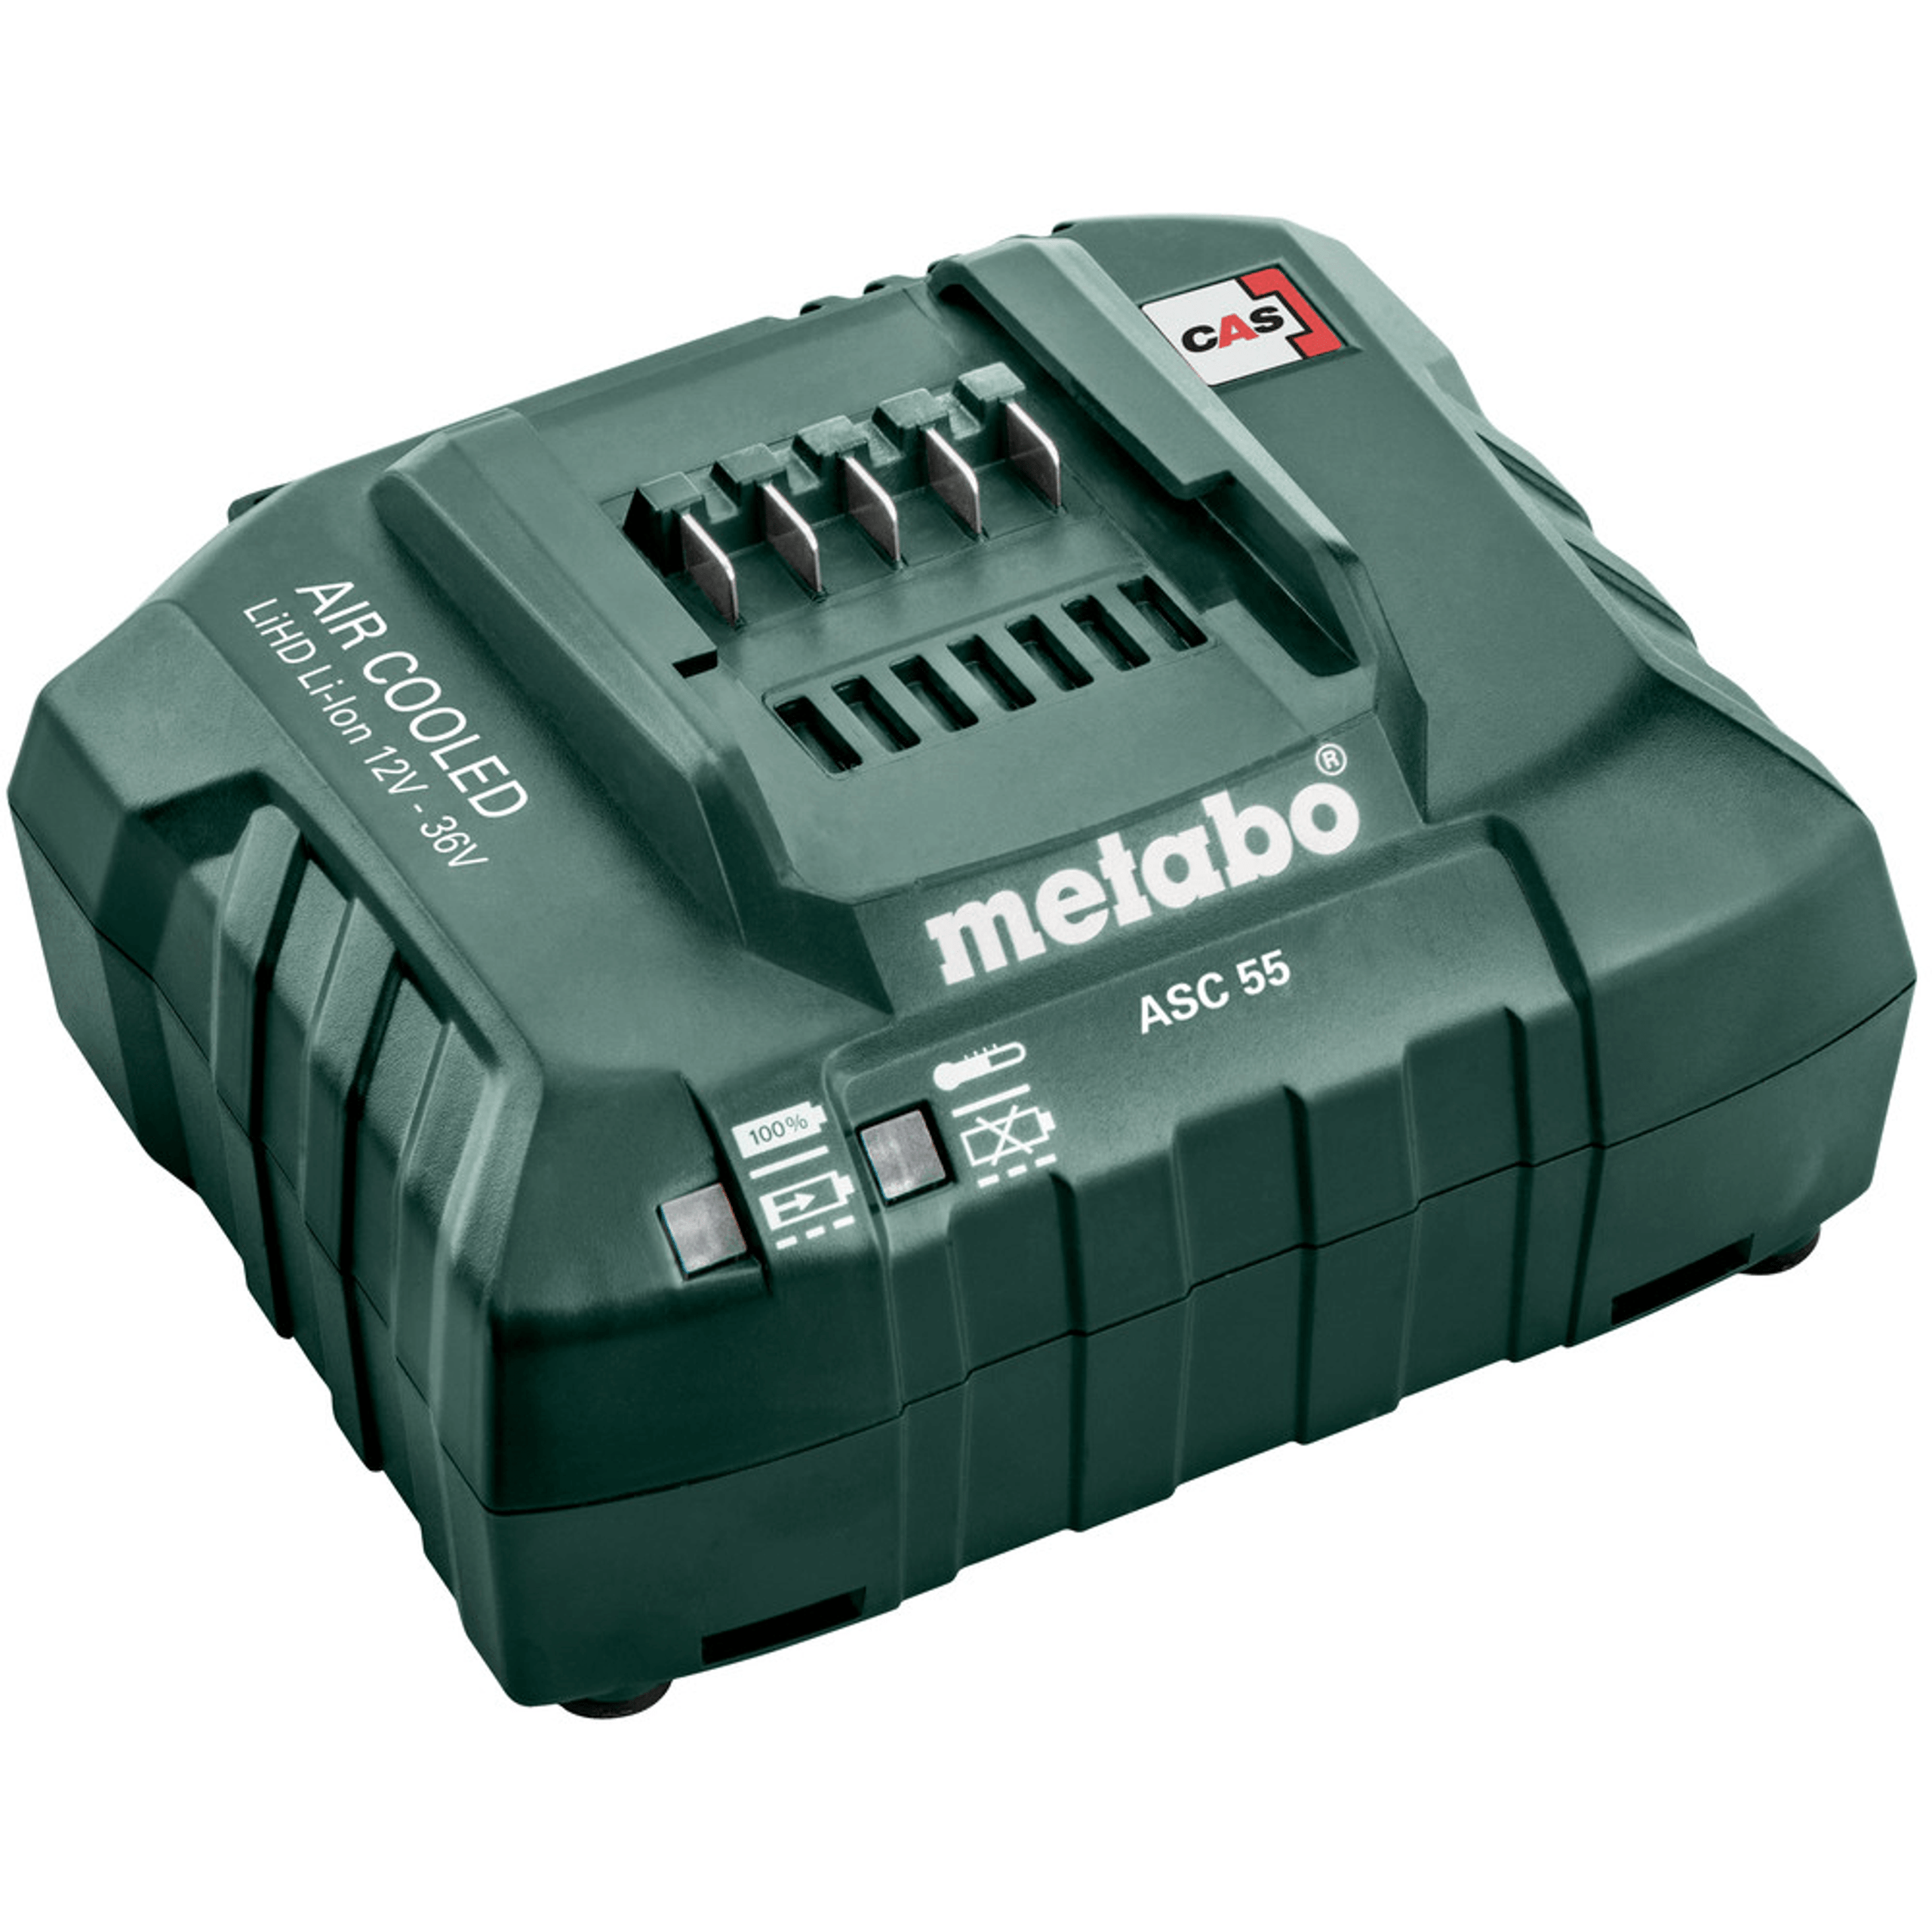 5.5Ah & 4.0Ah 10Pce Brushless Cordless Combo Kit AU69000250 by Metabo